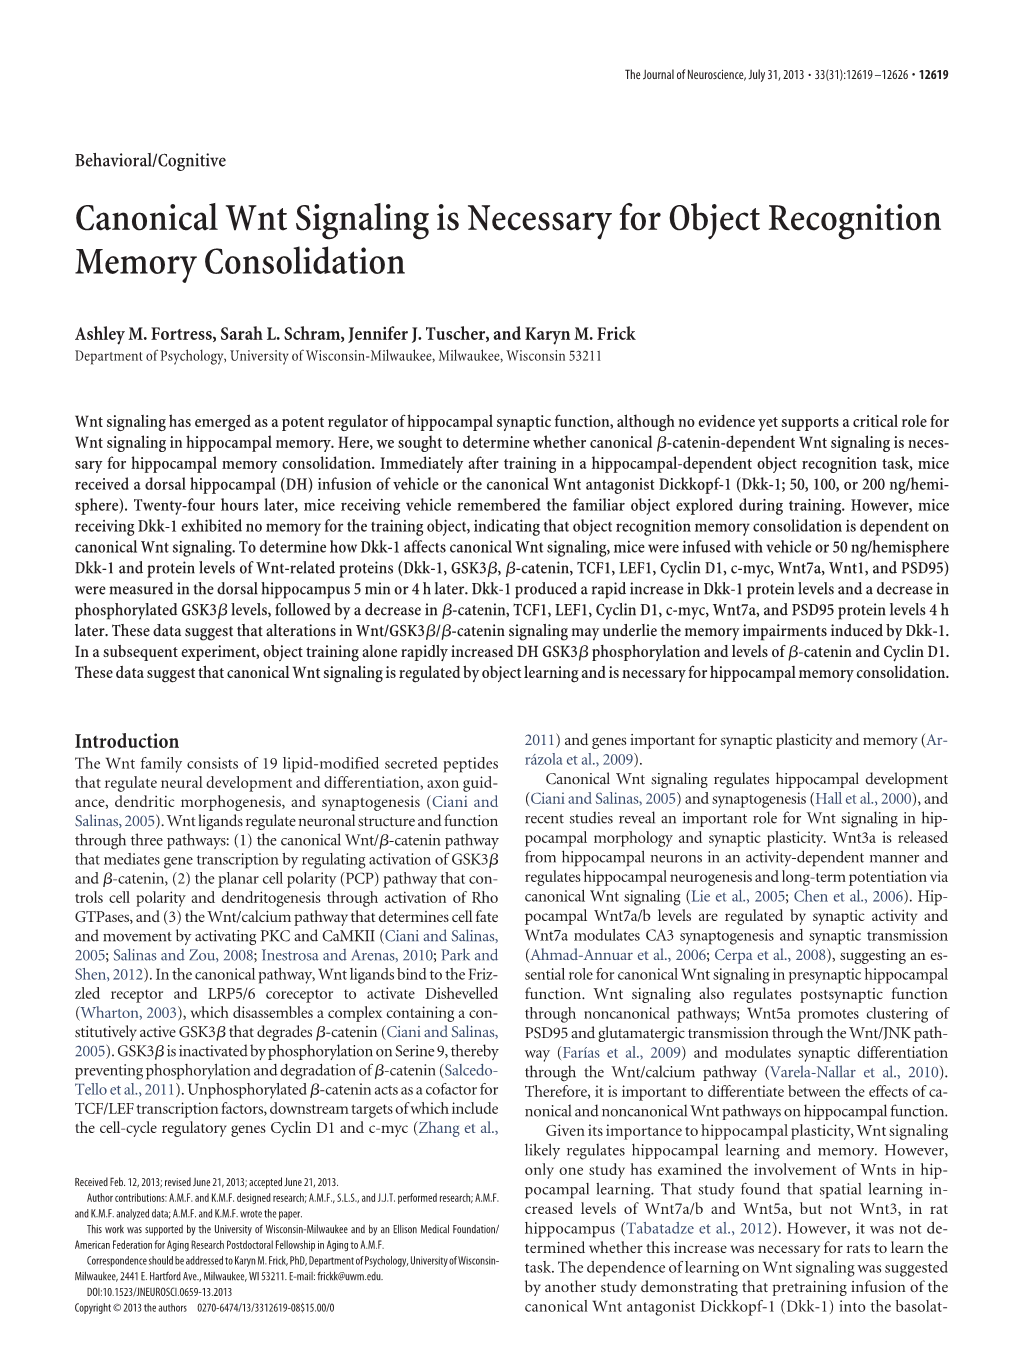 Canonical Wnt Signaling Is Necessary for Object Recognition Memory Consolidation